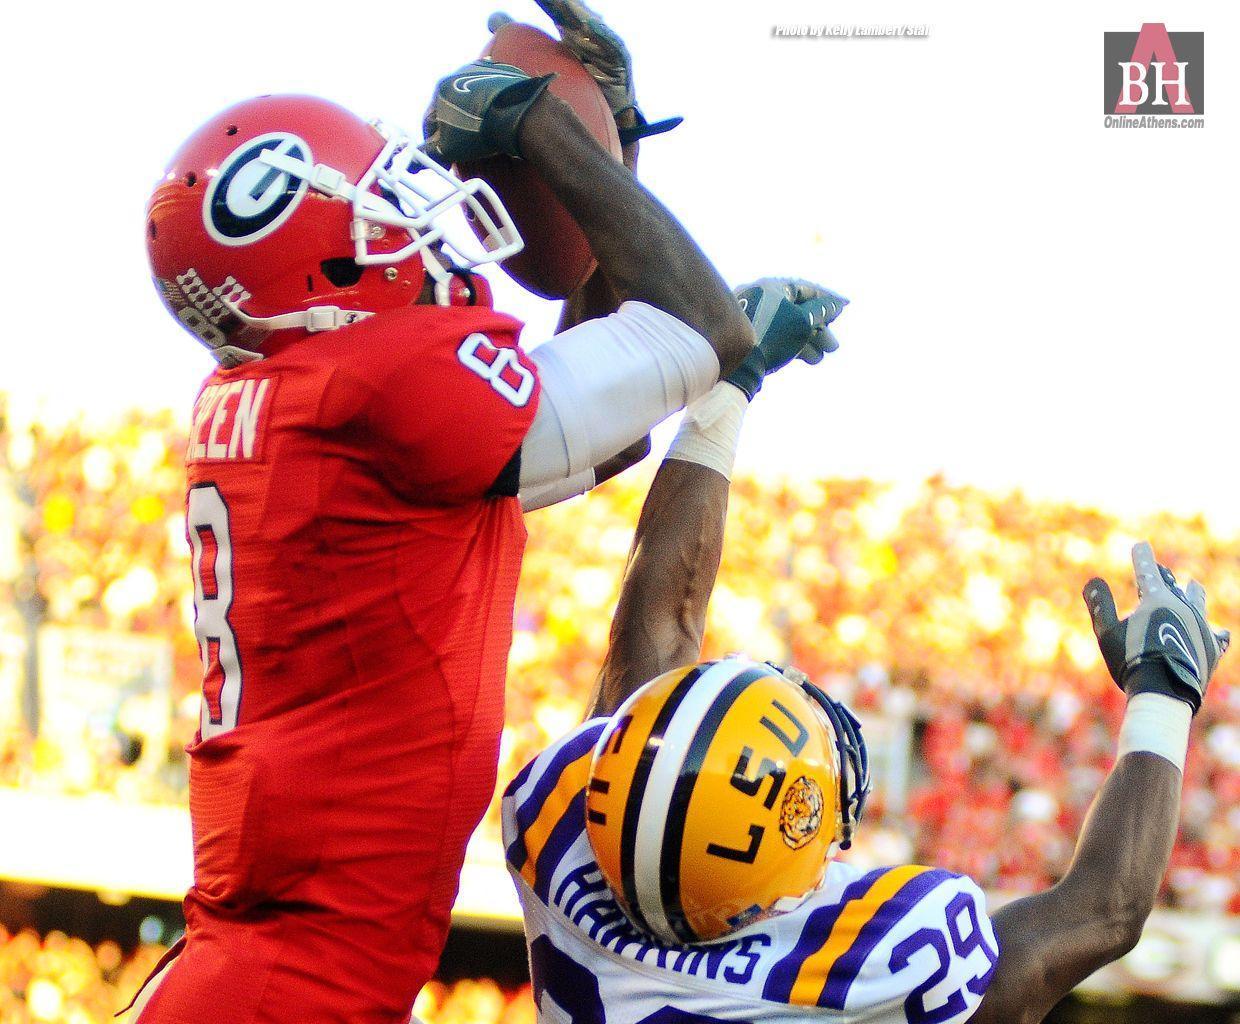 Wallpaper: A.J.'s catch and scenes from the LSU game